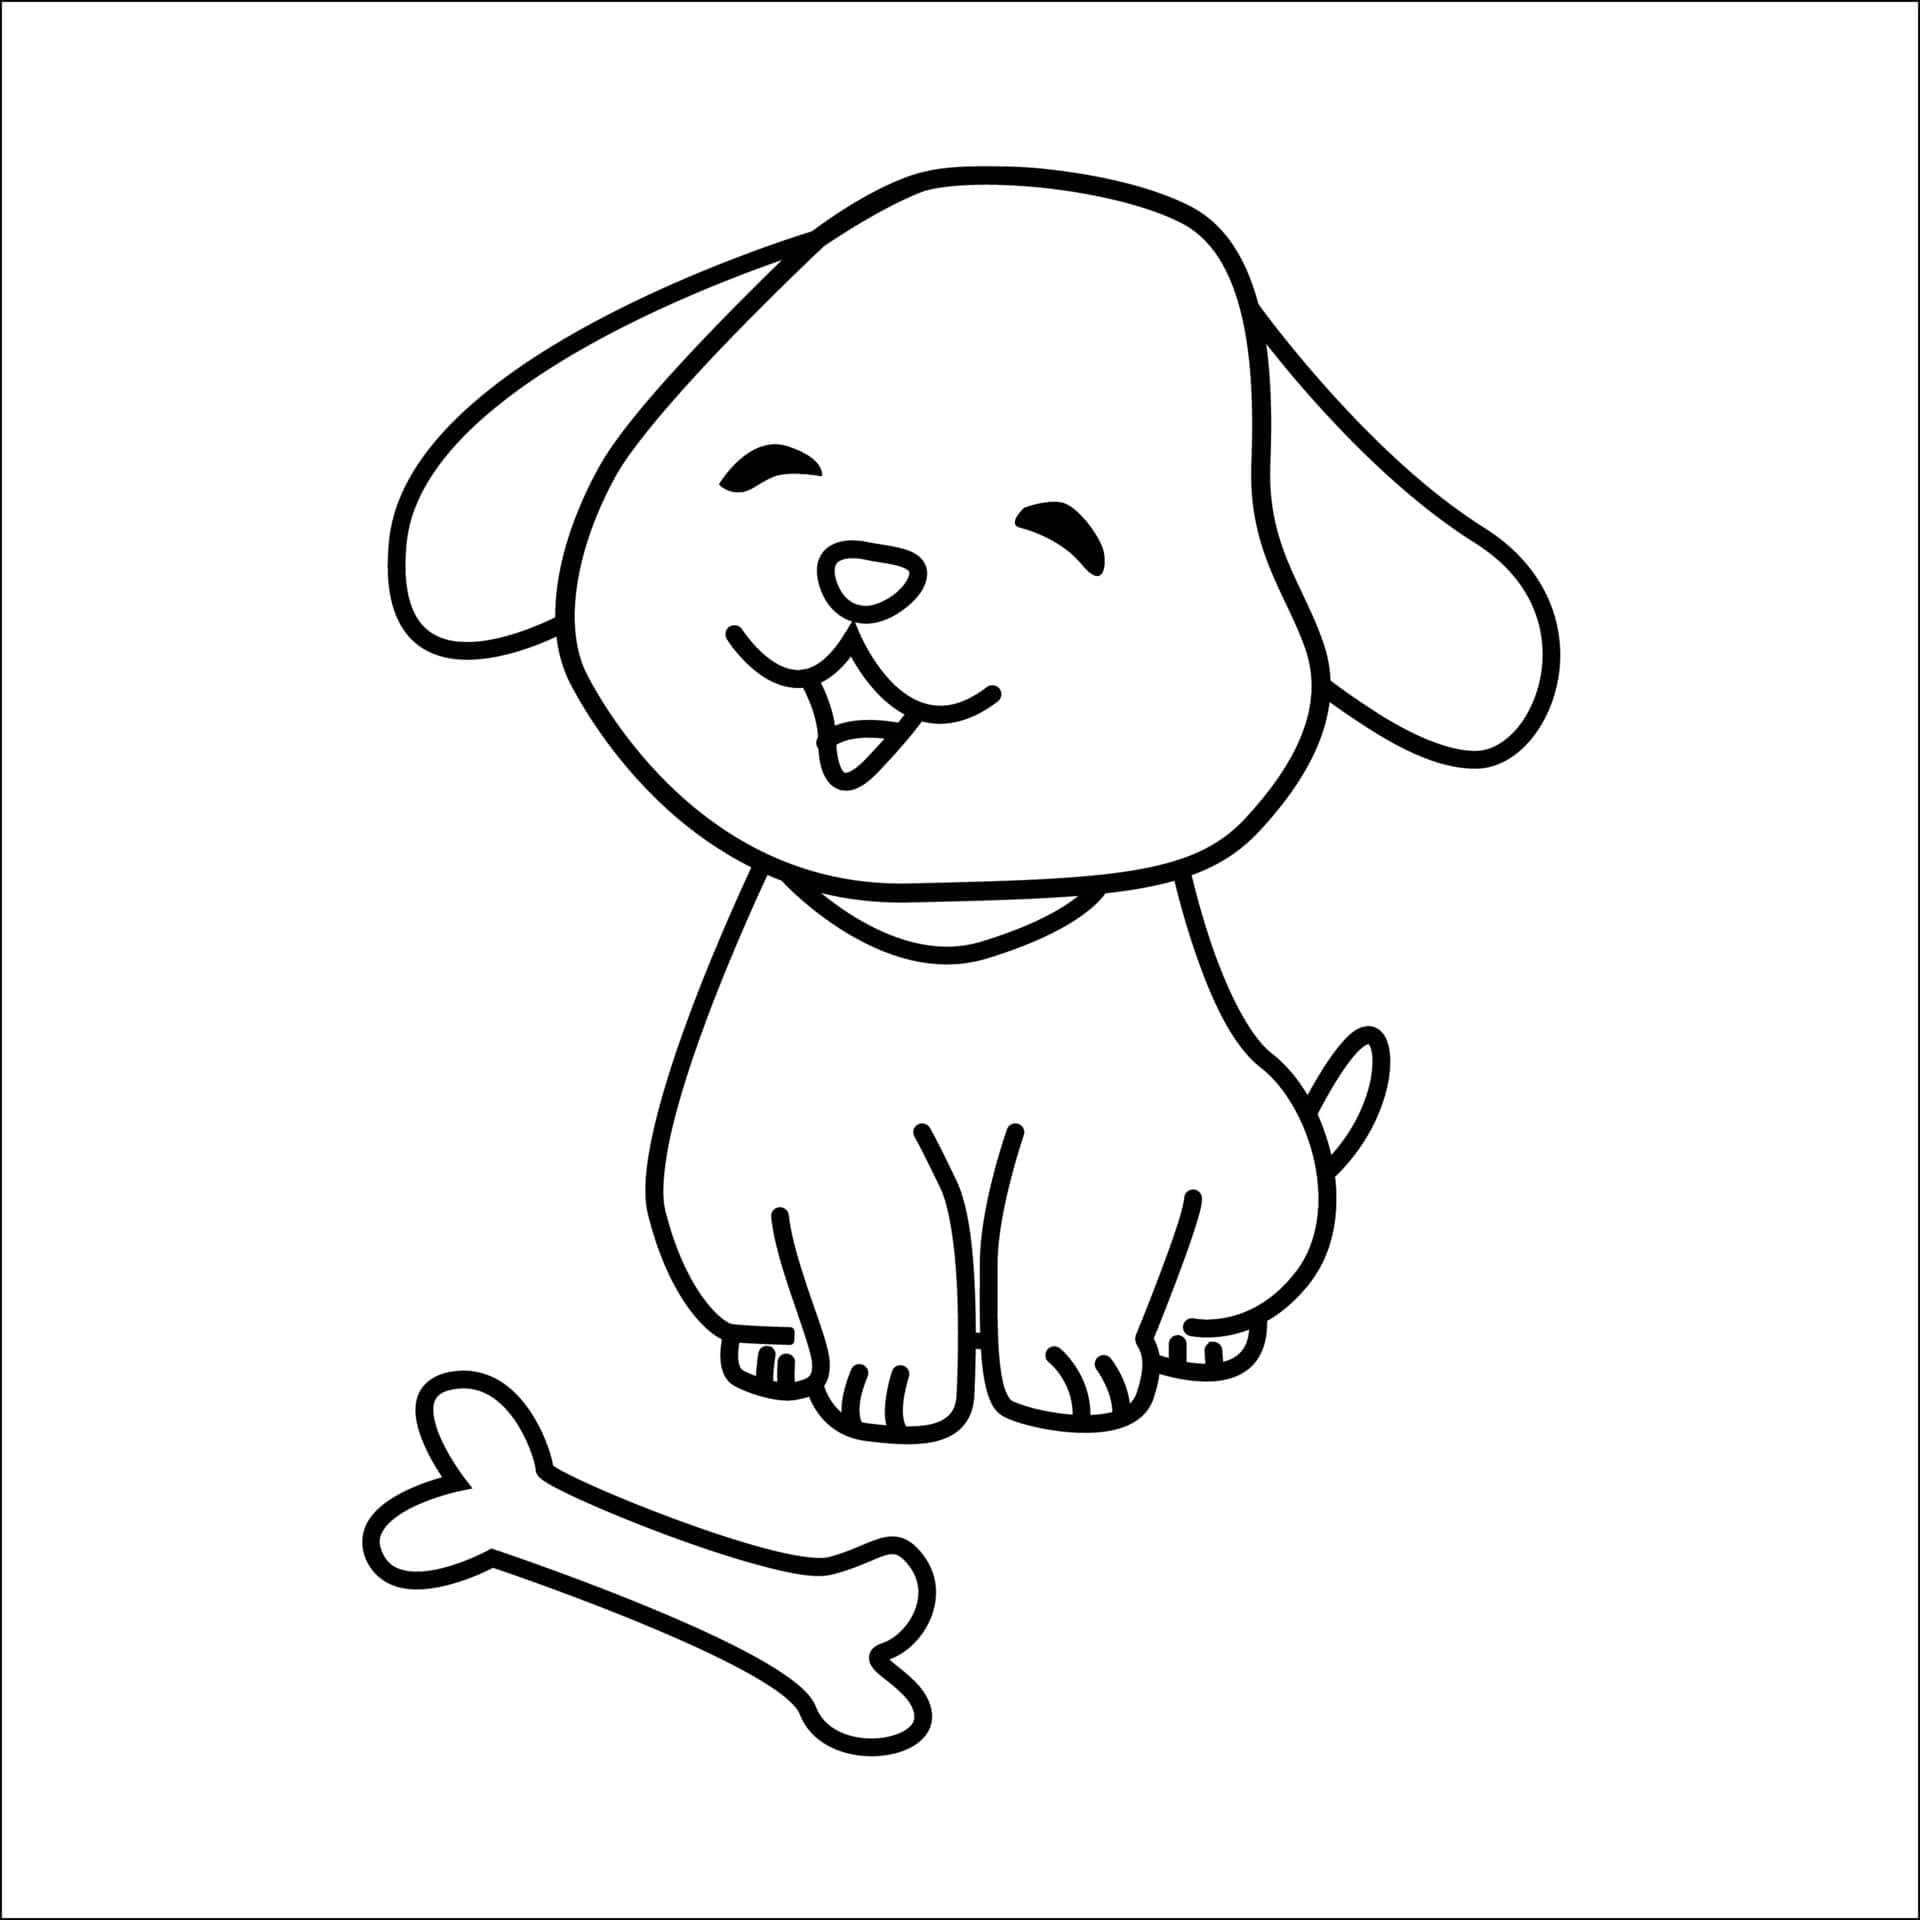 How To Draw A Dog | Easy Step By Step Printable Activities - World of  Printables